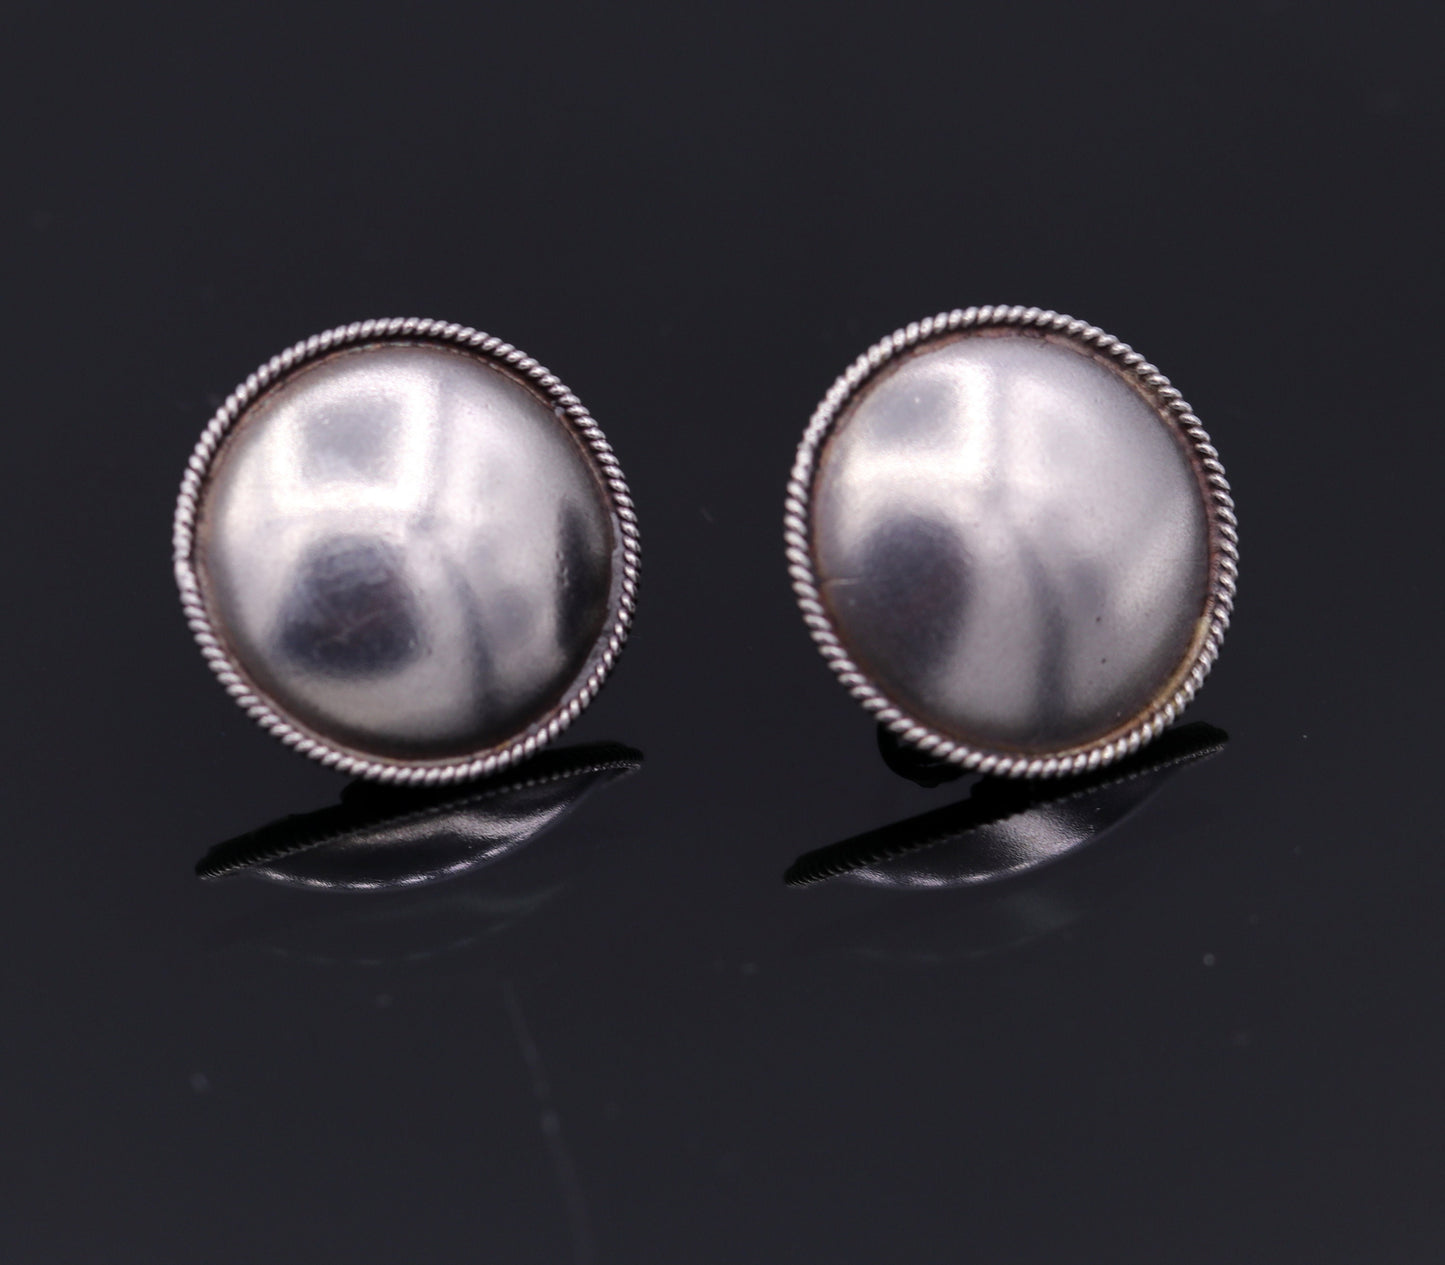 High quality 925 sterling silver plain style handmade round design fabulous Stud earrings tribal jewelry from Rajasthan india  s526 - TRIBAL ORNAMENTS